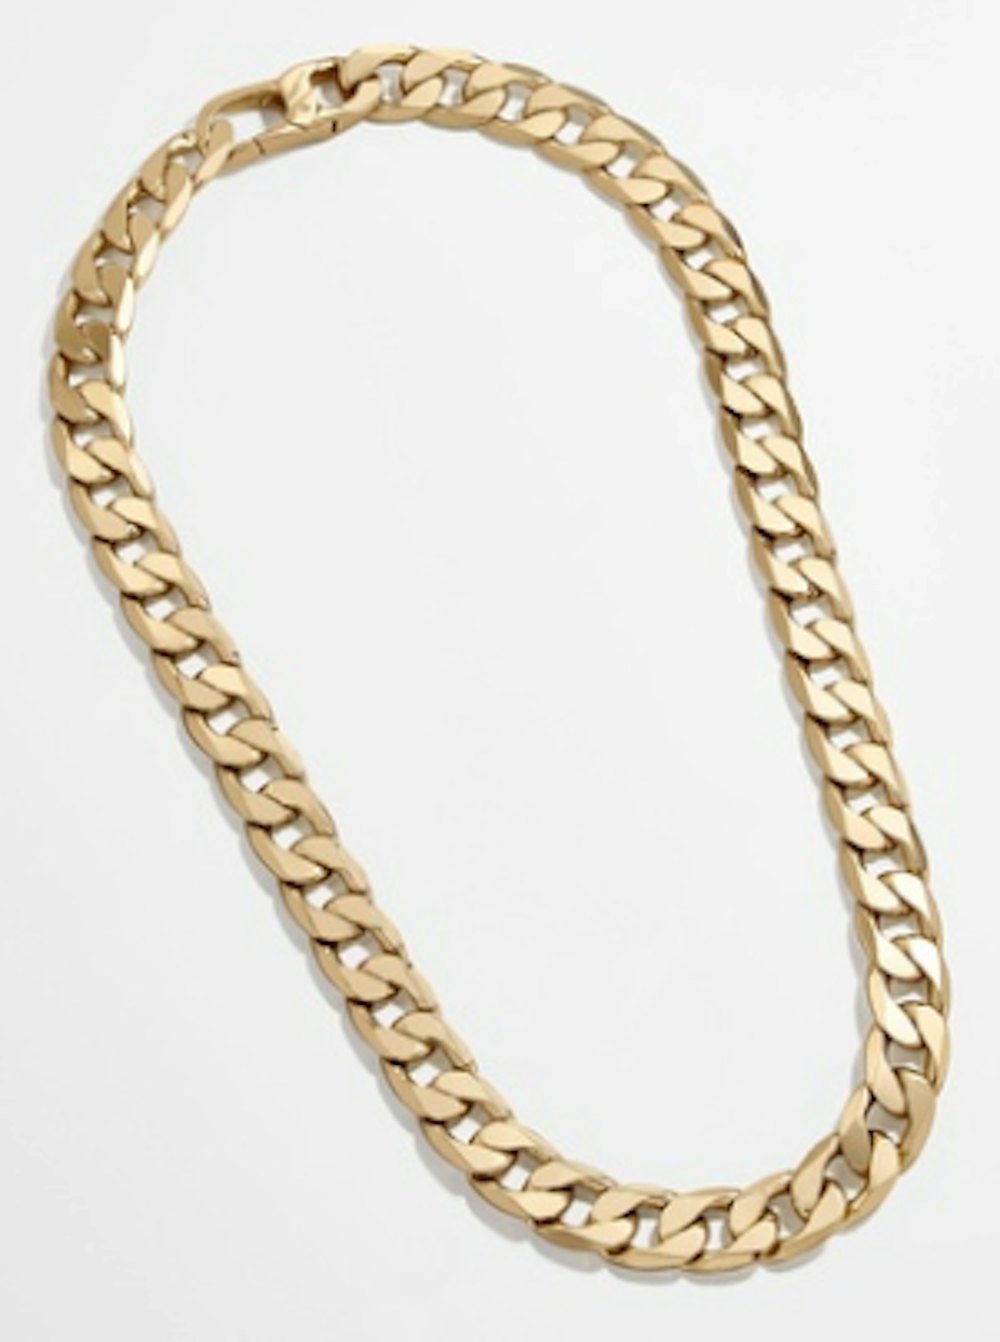 Large Michel Curb Chain Necklace